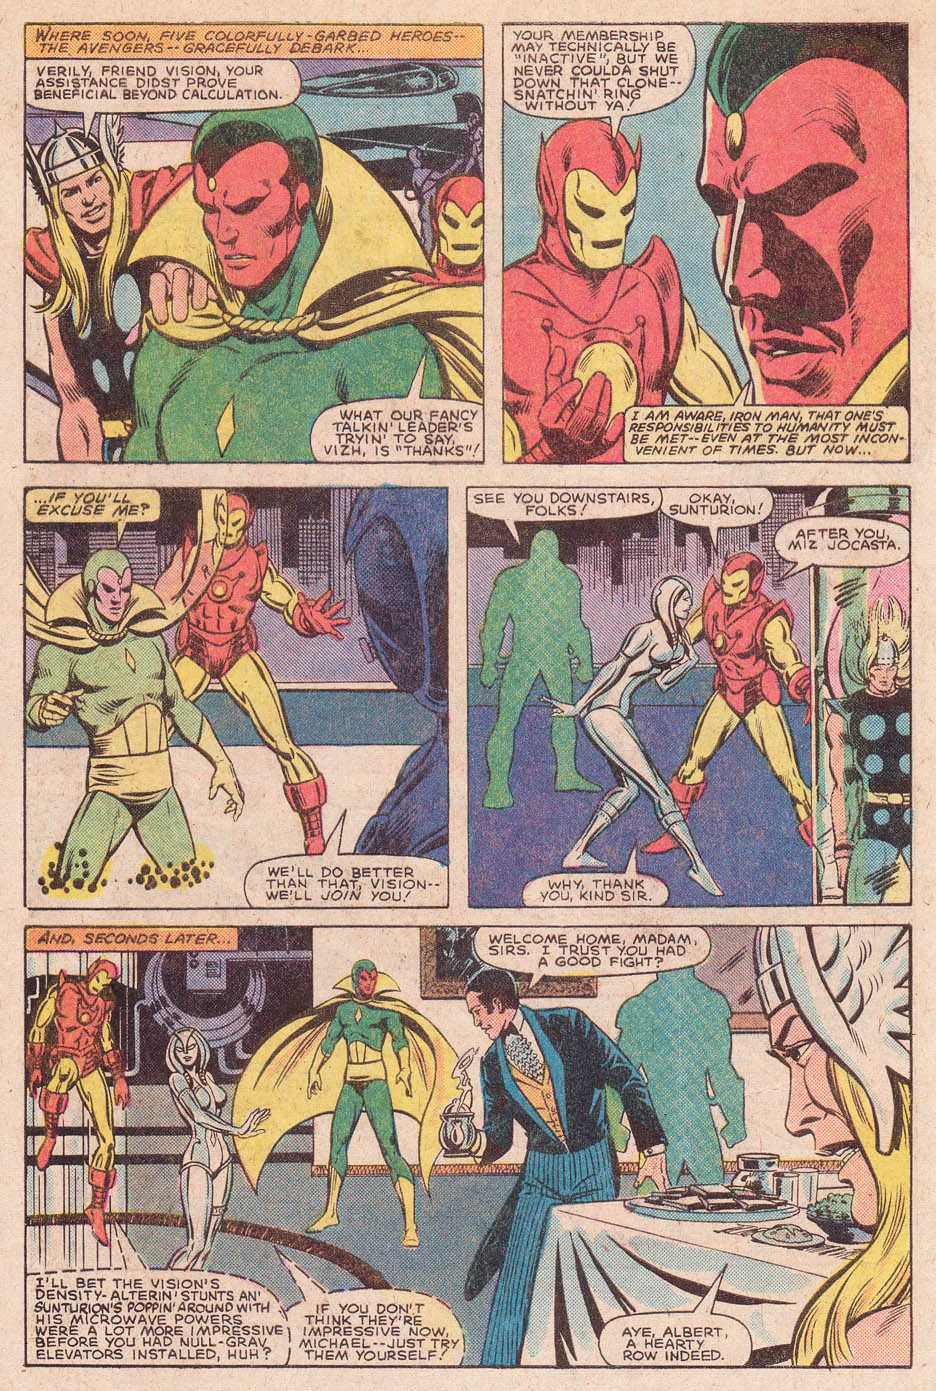 What If? (1977) issue 38 - Daredevil and Captain America - Page 4